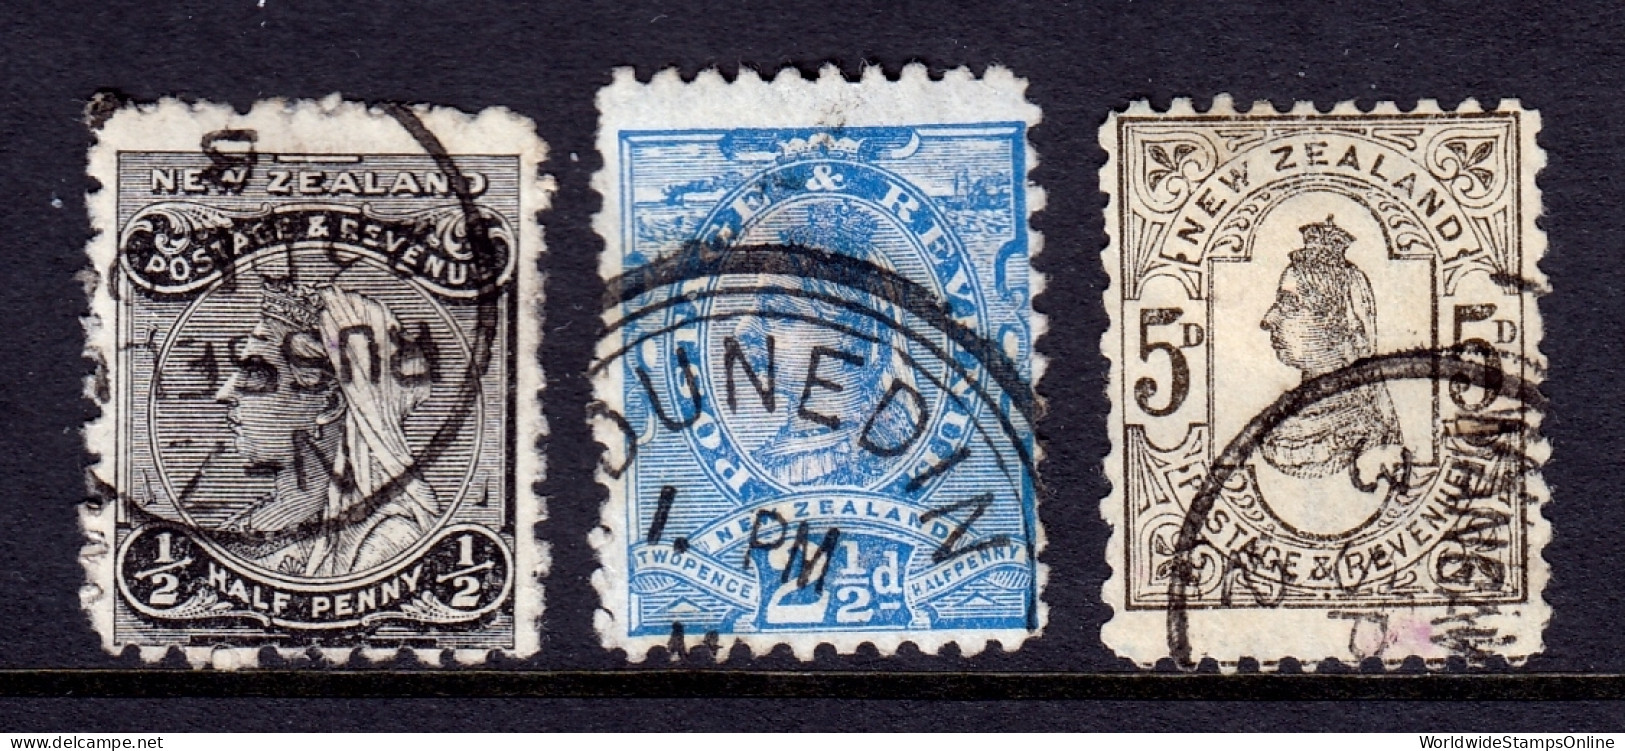 New Zealand - Scott #67A-69 - Used - #68 Has Heavy Old-time Hinge - SCV $30 - Used Stamps